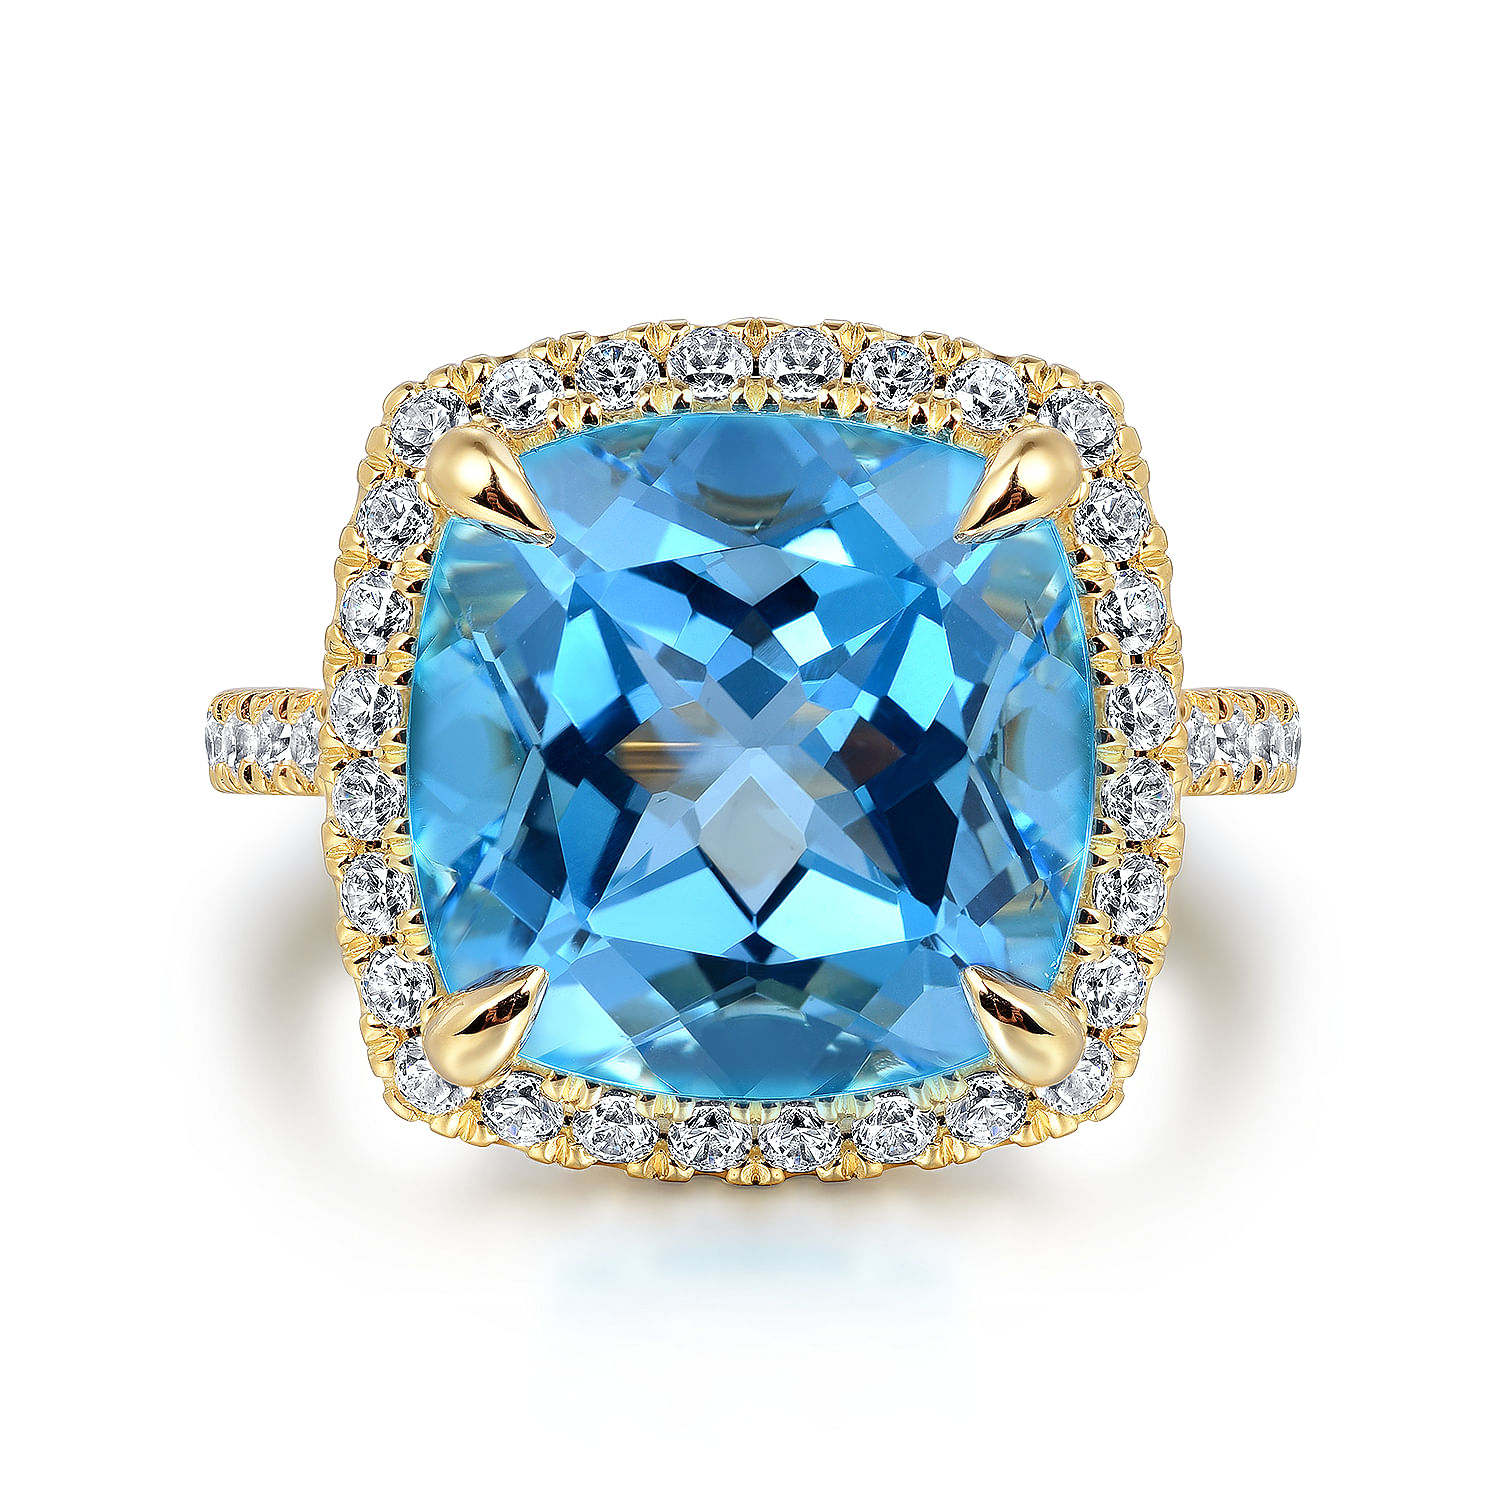 14K Yellow Gold Diamond and Blue Topaz Cushion Cut Ladies Ring With Flower Pattern Gallery